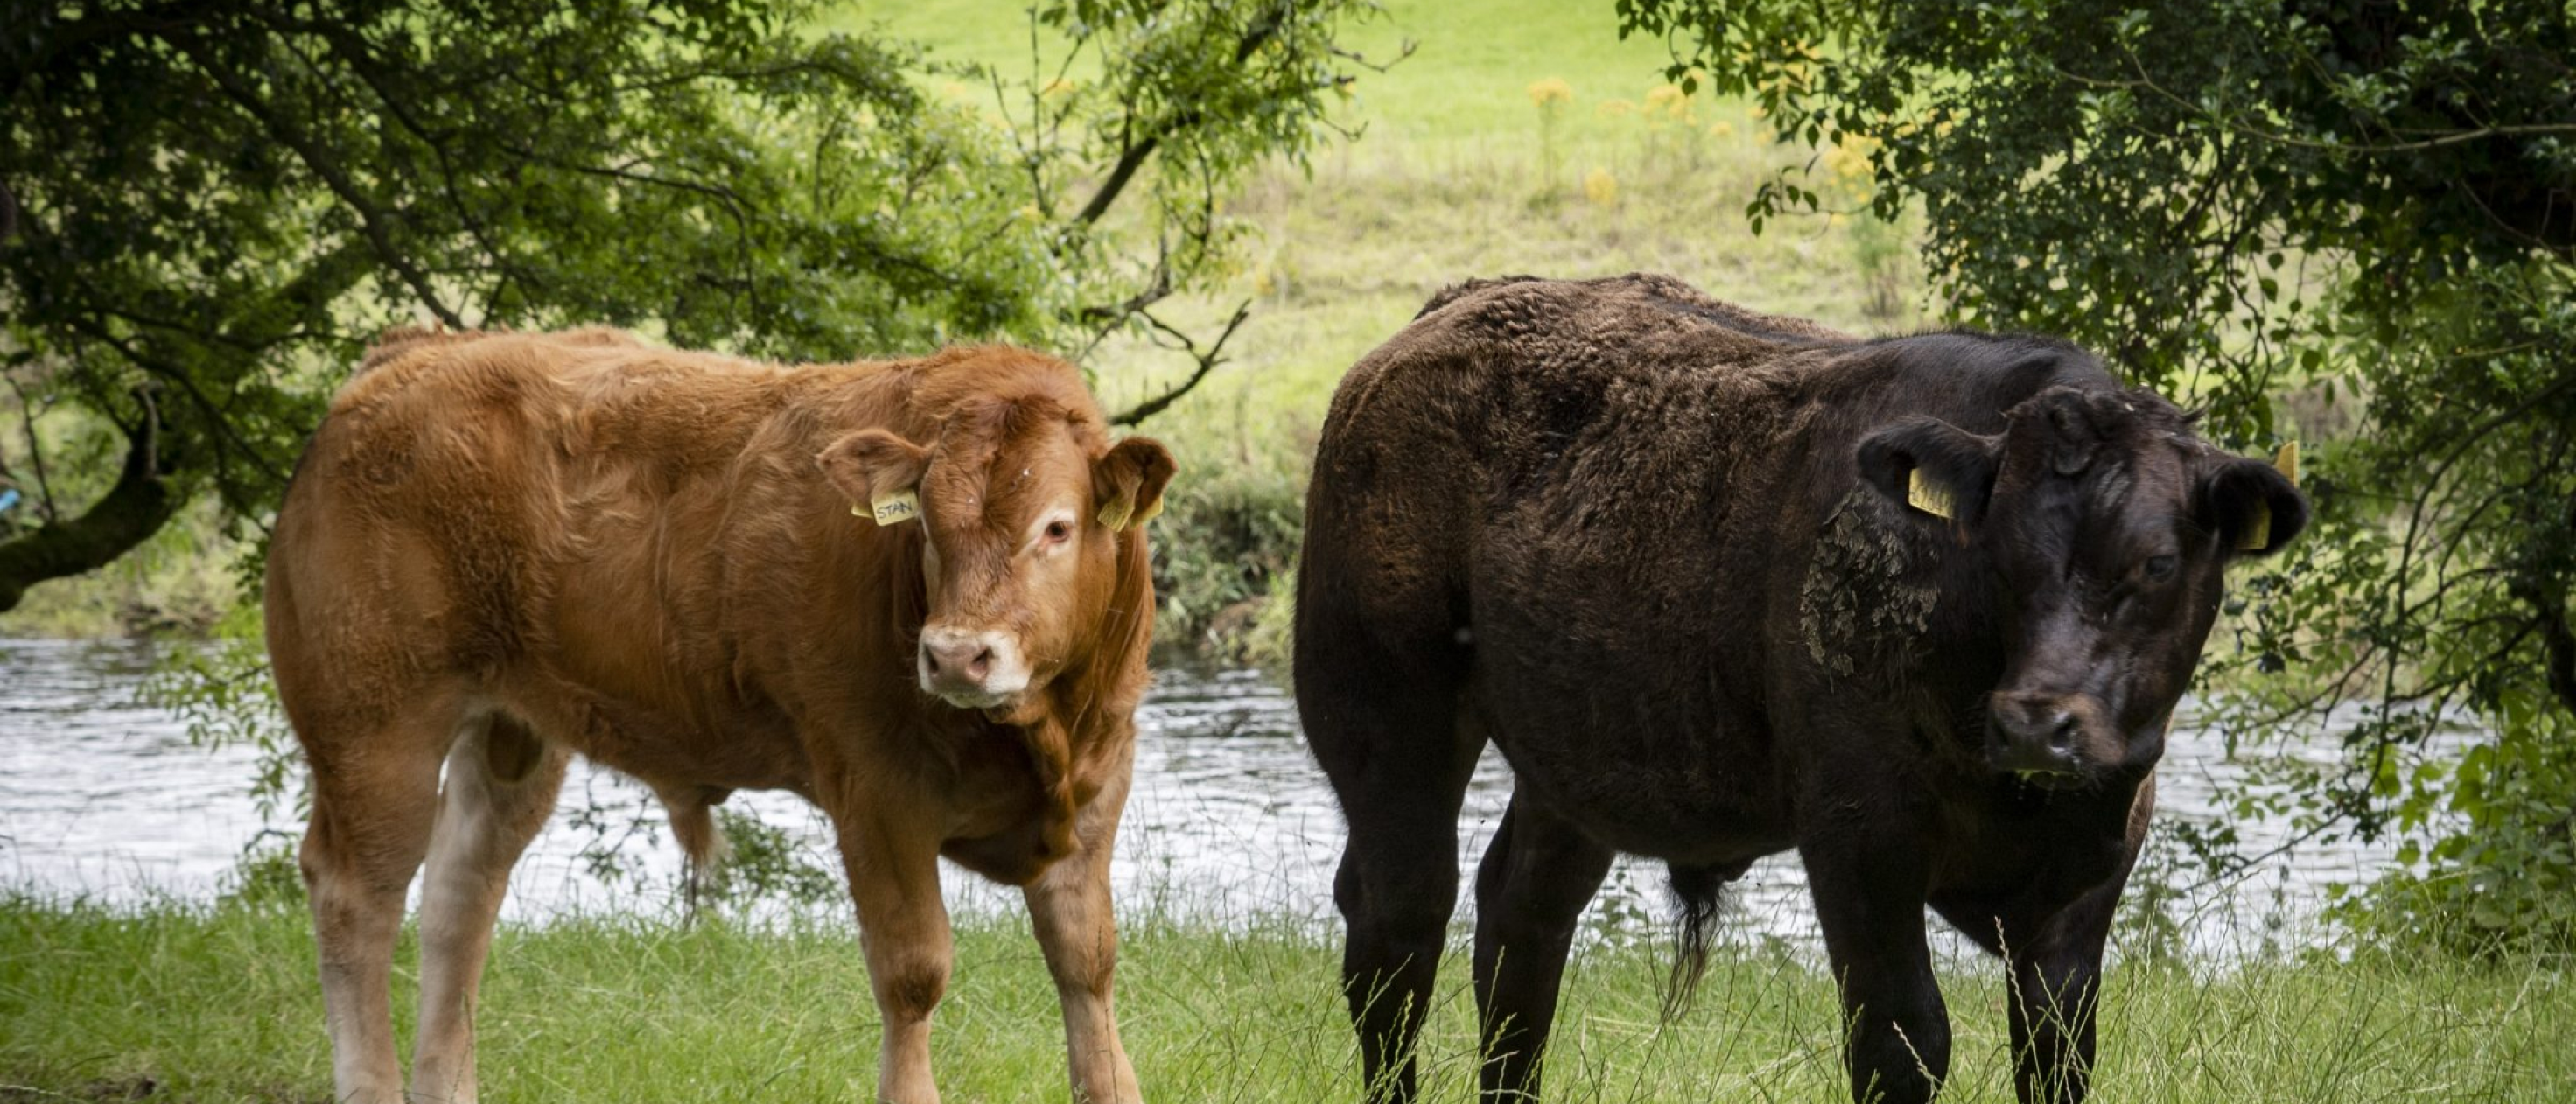 a group of cows standing in grass near a river